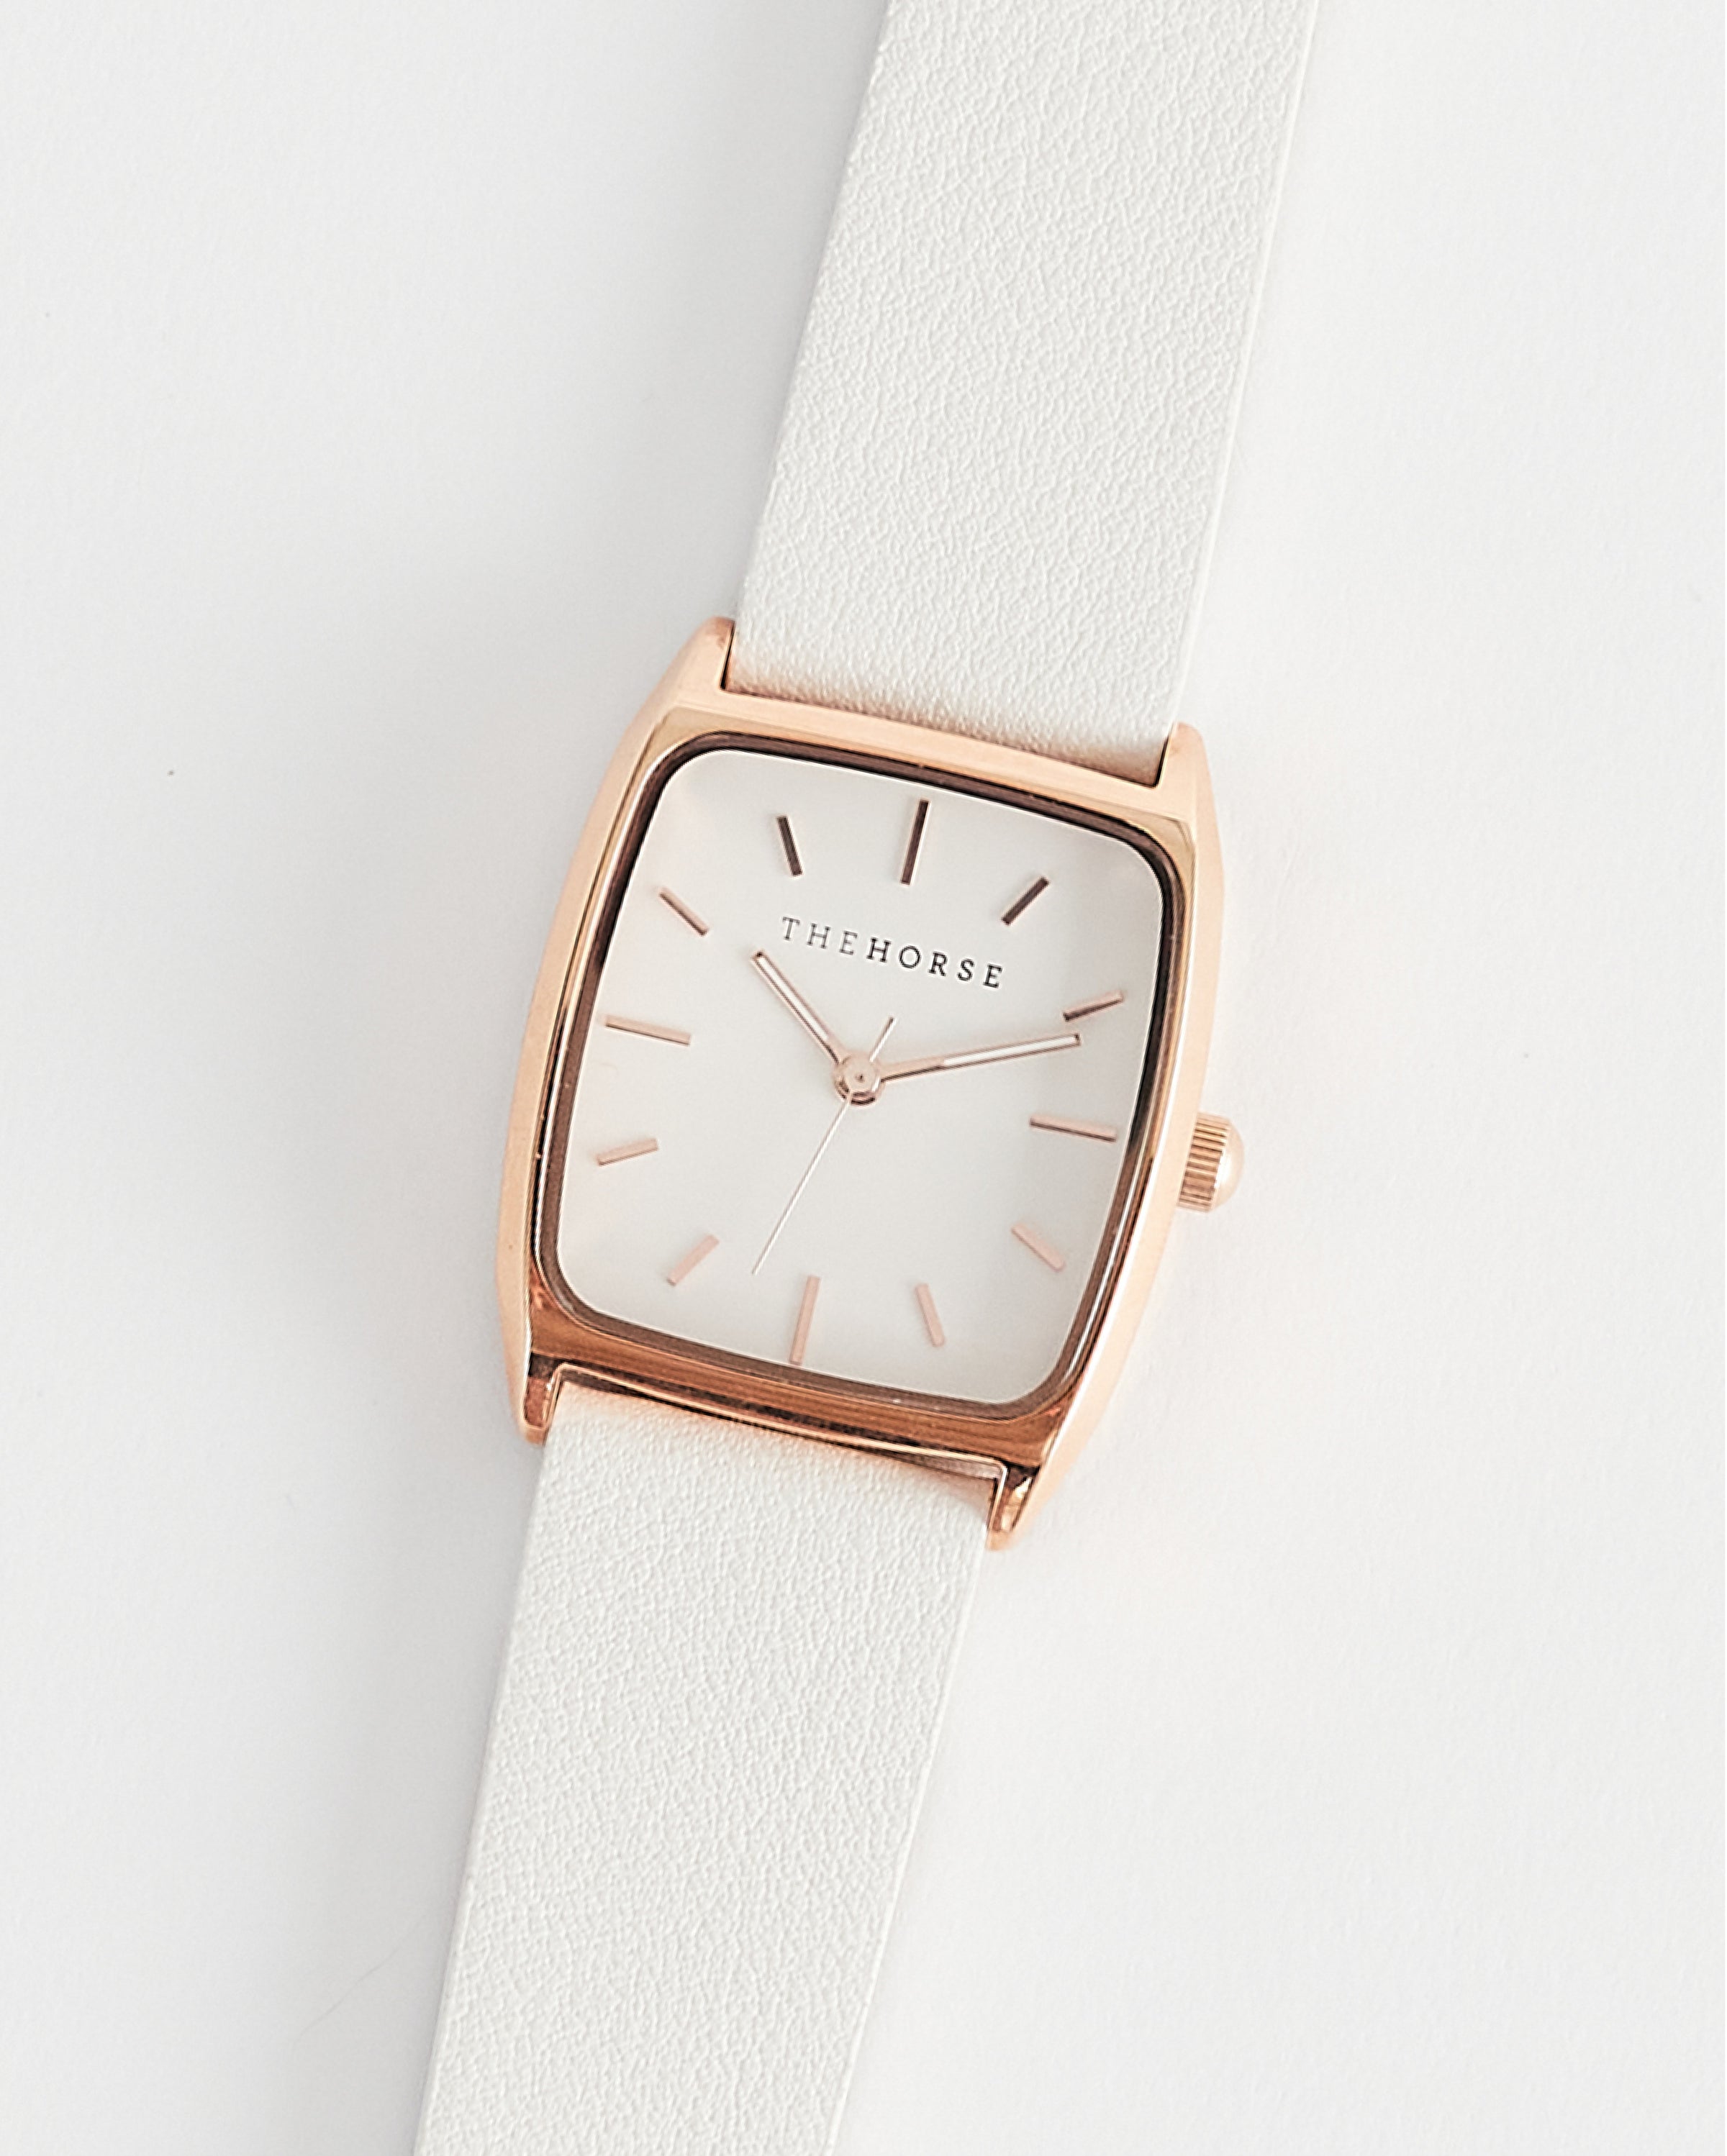 The Dress Watch: Rose Gold Case / White Dial / Milk Leather